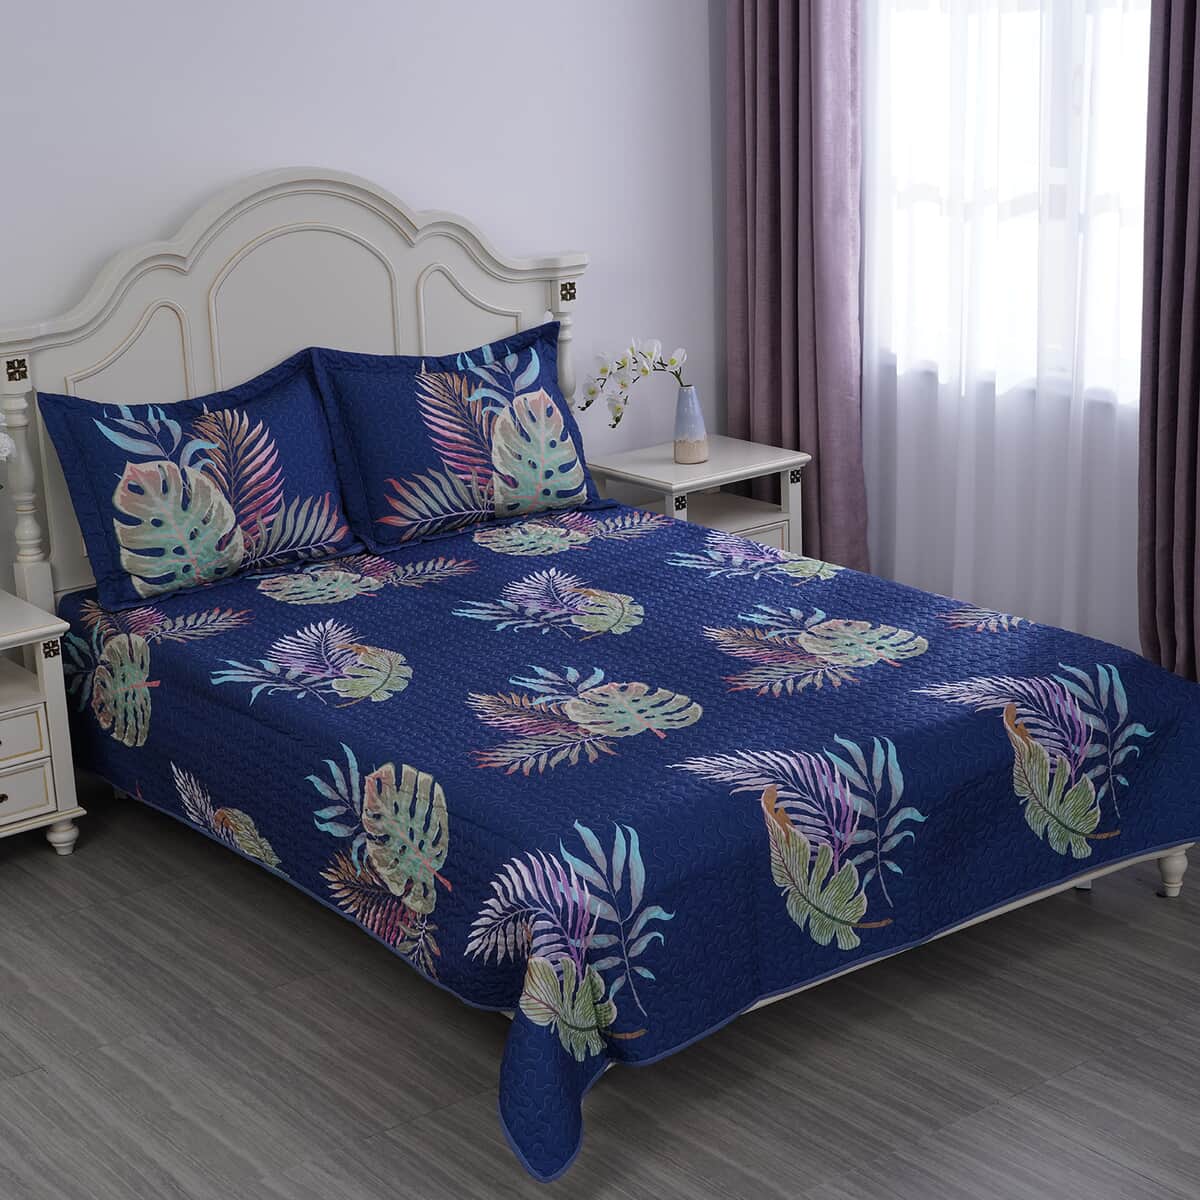 Homesmart Blue Tropical Digital Print 100% Microfiber Quilted Bedspread and 2 Pillow Shams - King image number 0